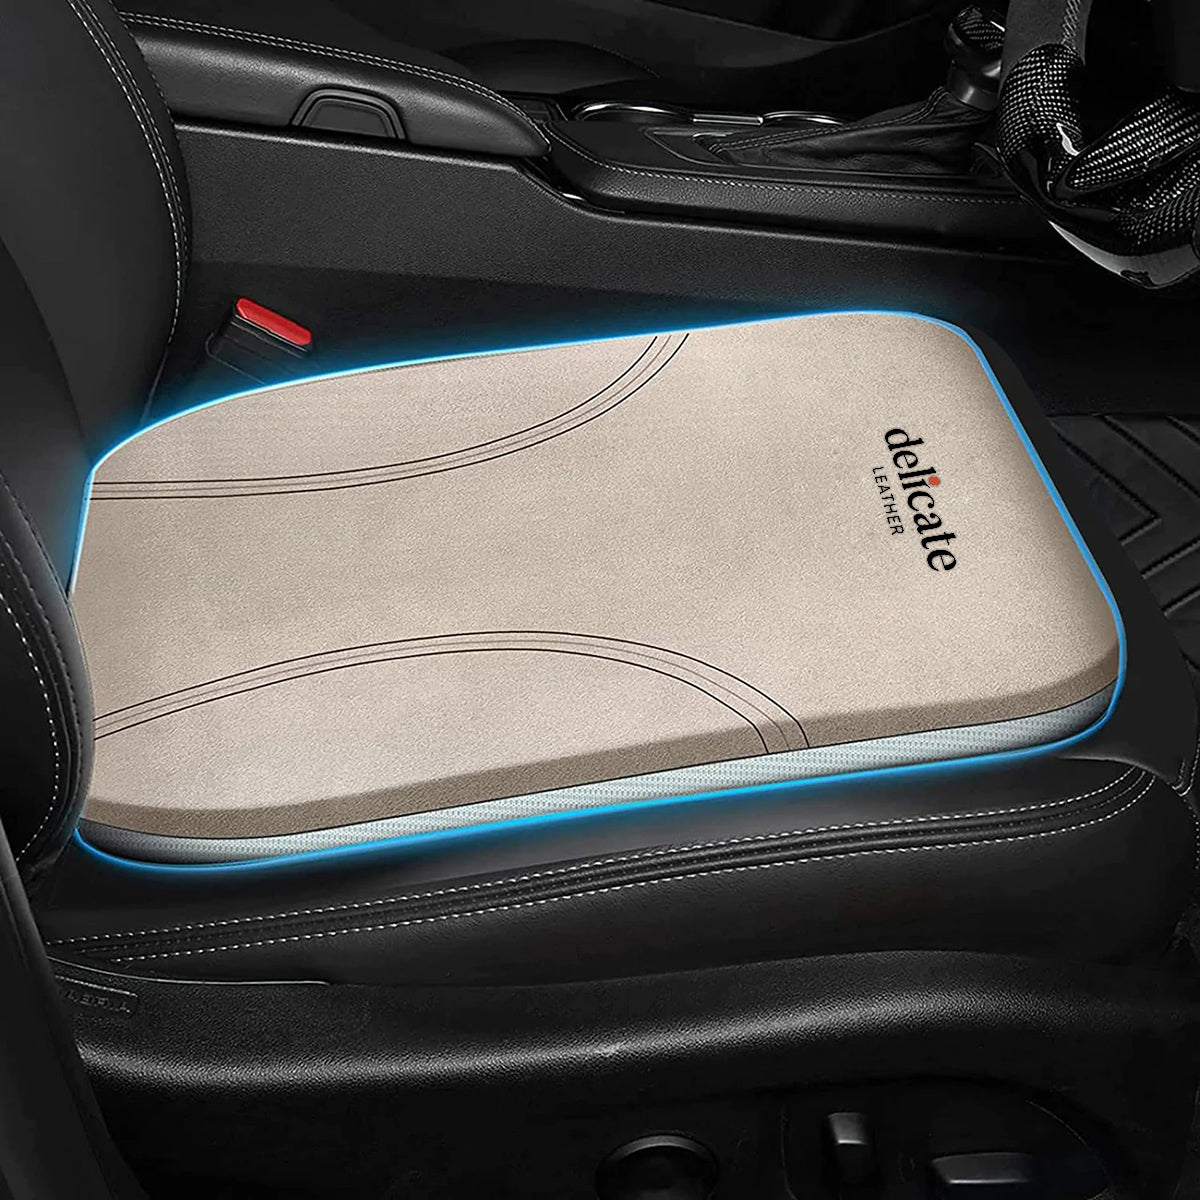 GMC Car Seat Cushion: Enhance Comfort and Support for Your Drive